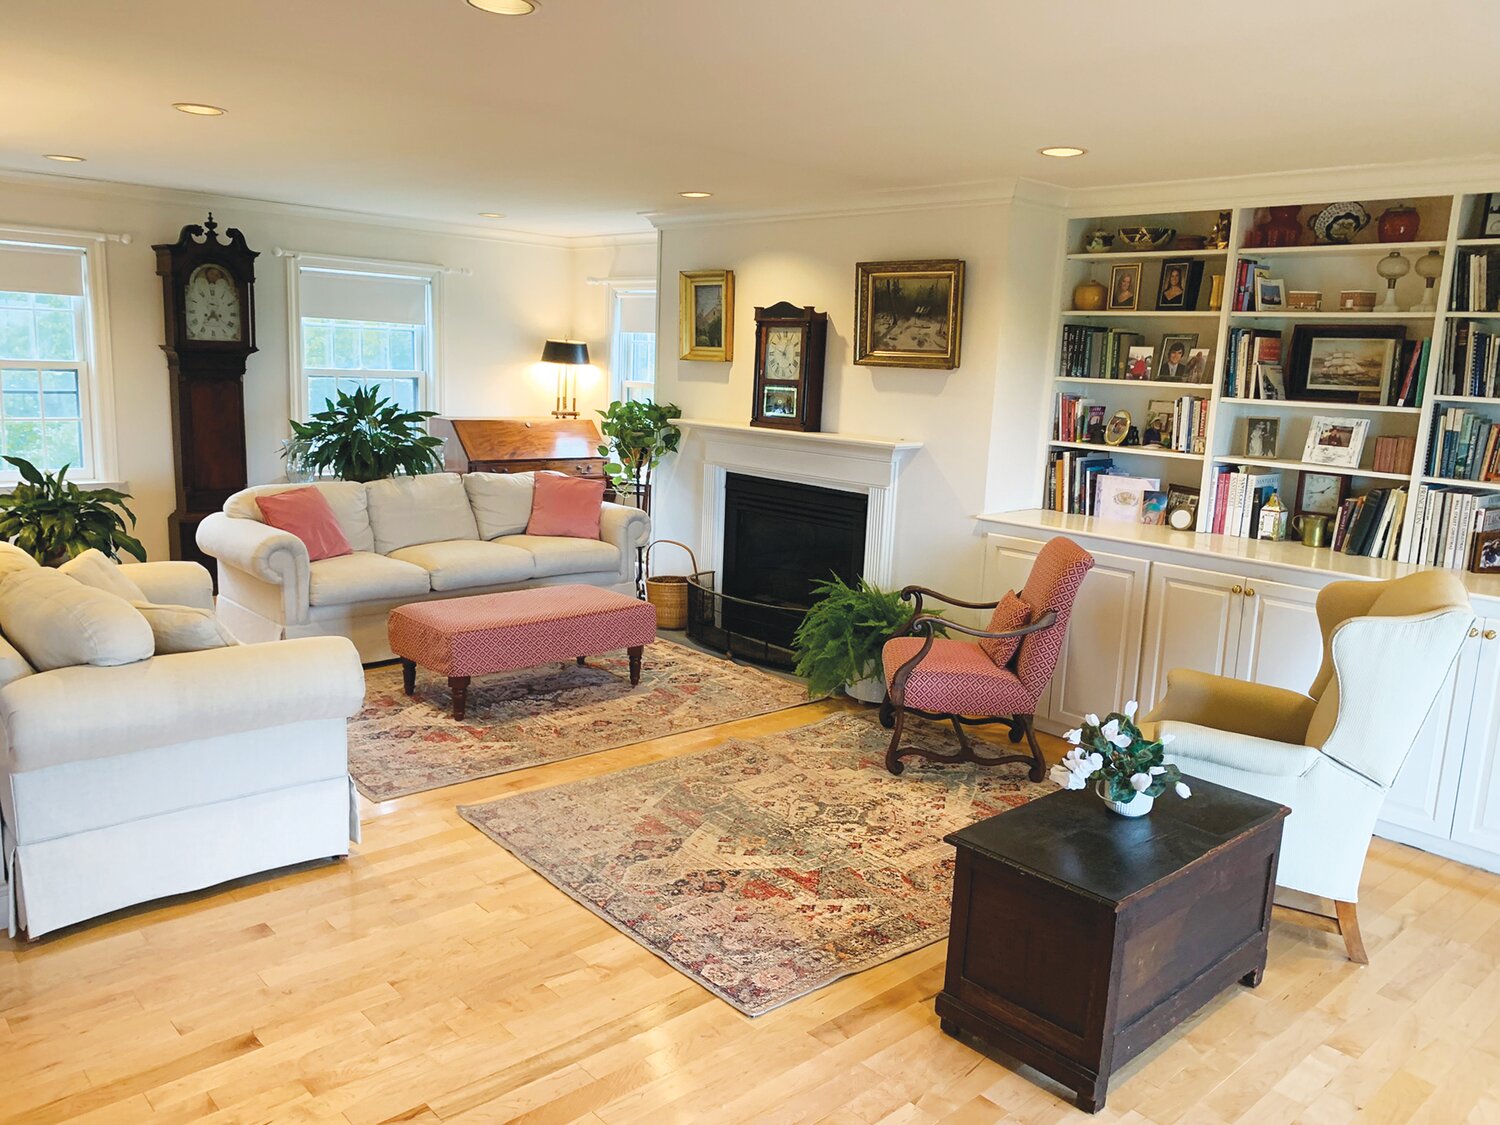 The living room has a propane fireplace, wood floors and plenty of built-in cabinetry and shelving.